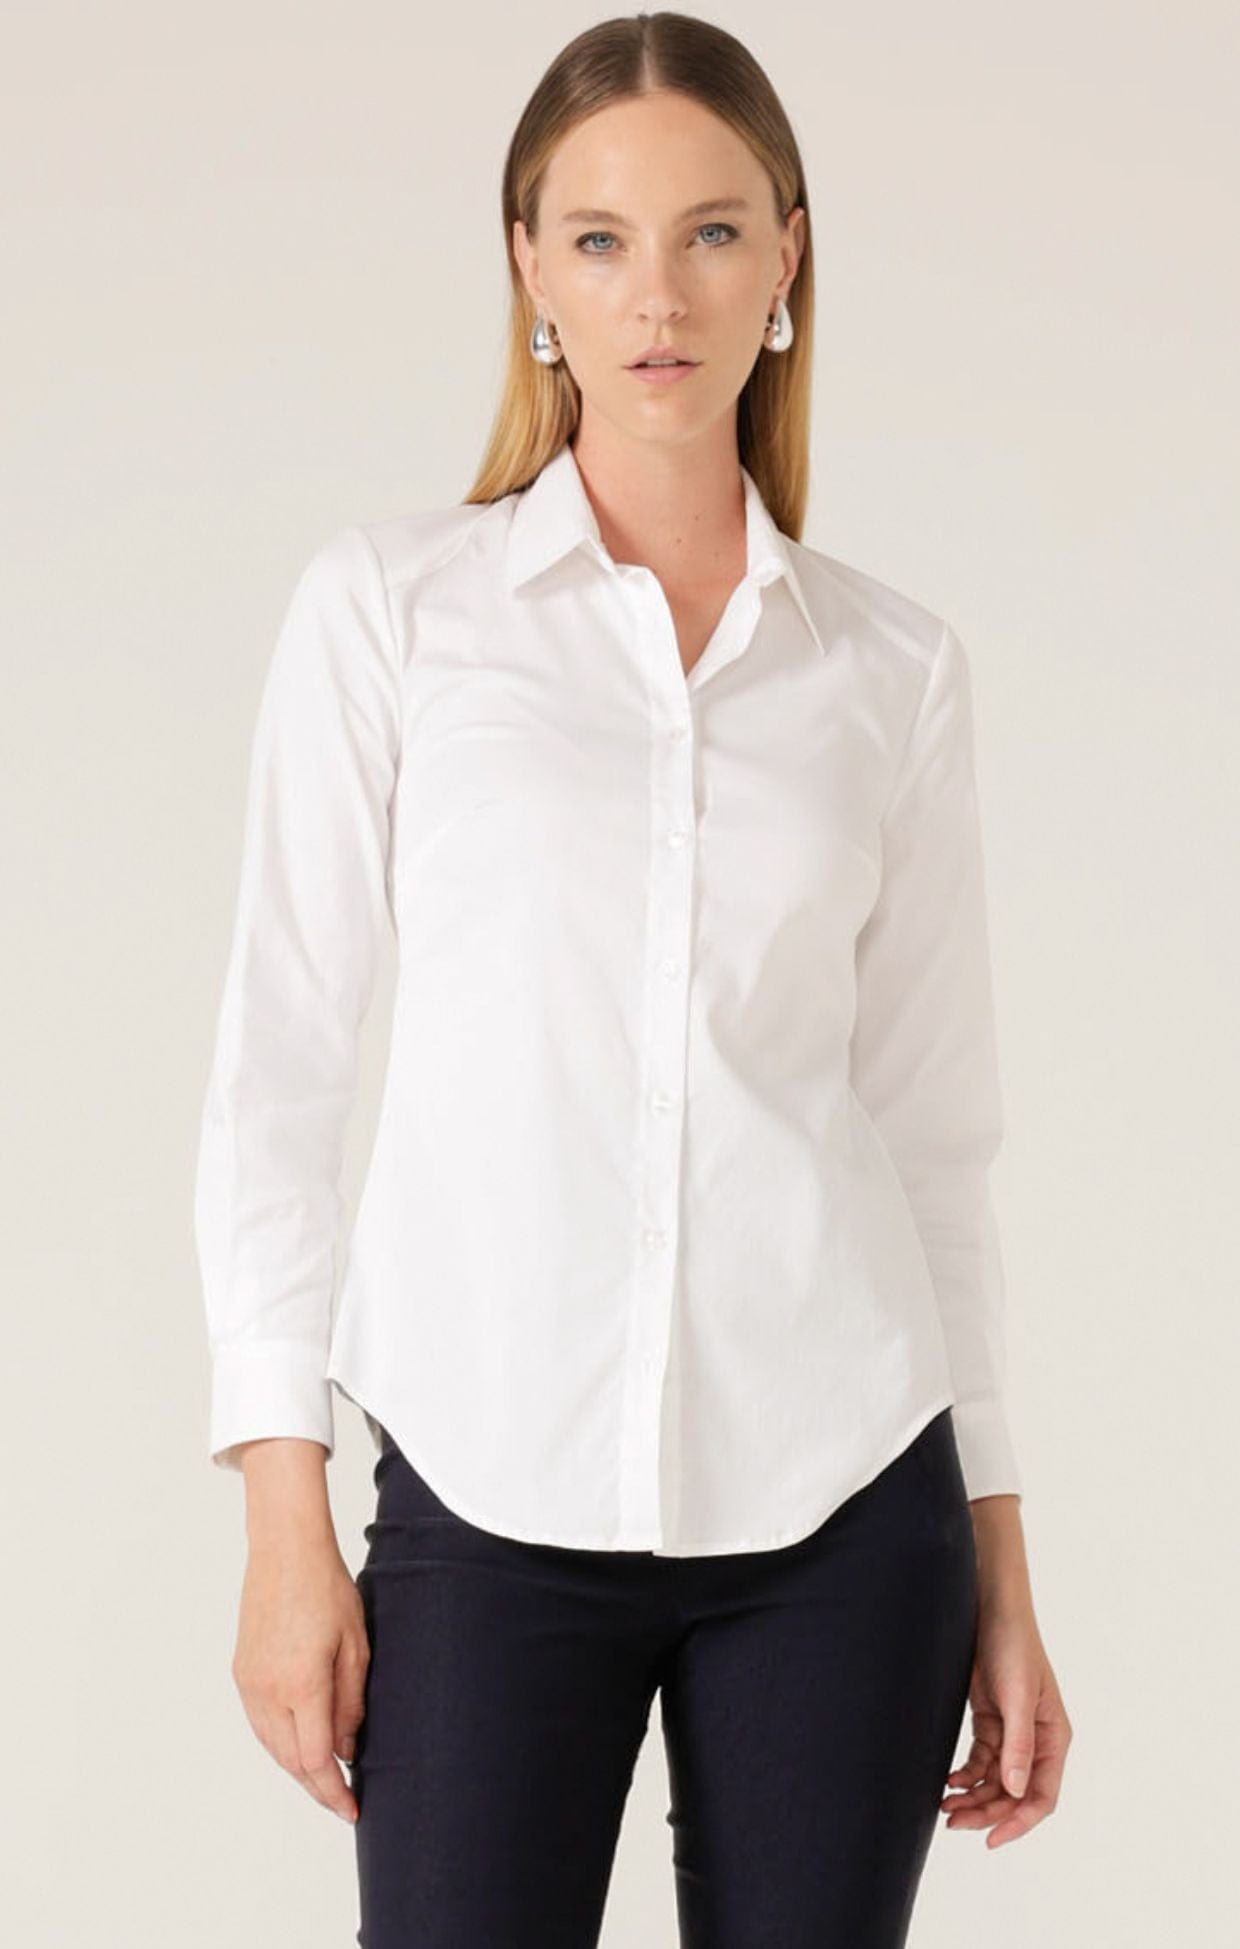 White Shirt for Women - Occasion CLASSIC SHIRT IN WHITE